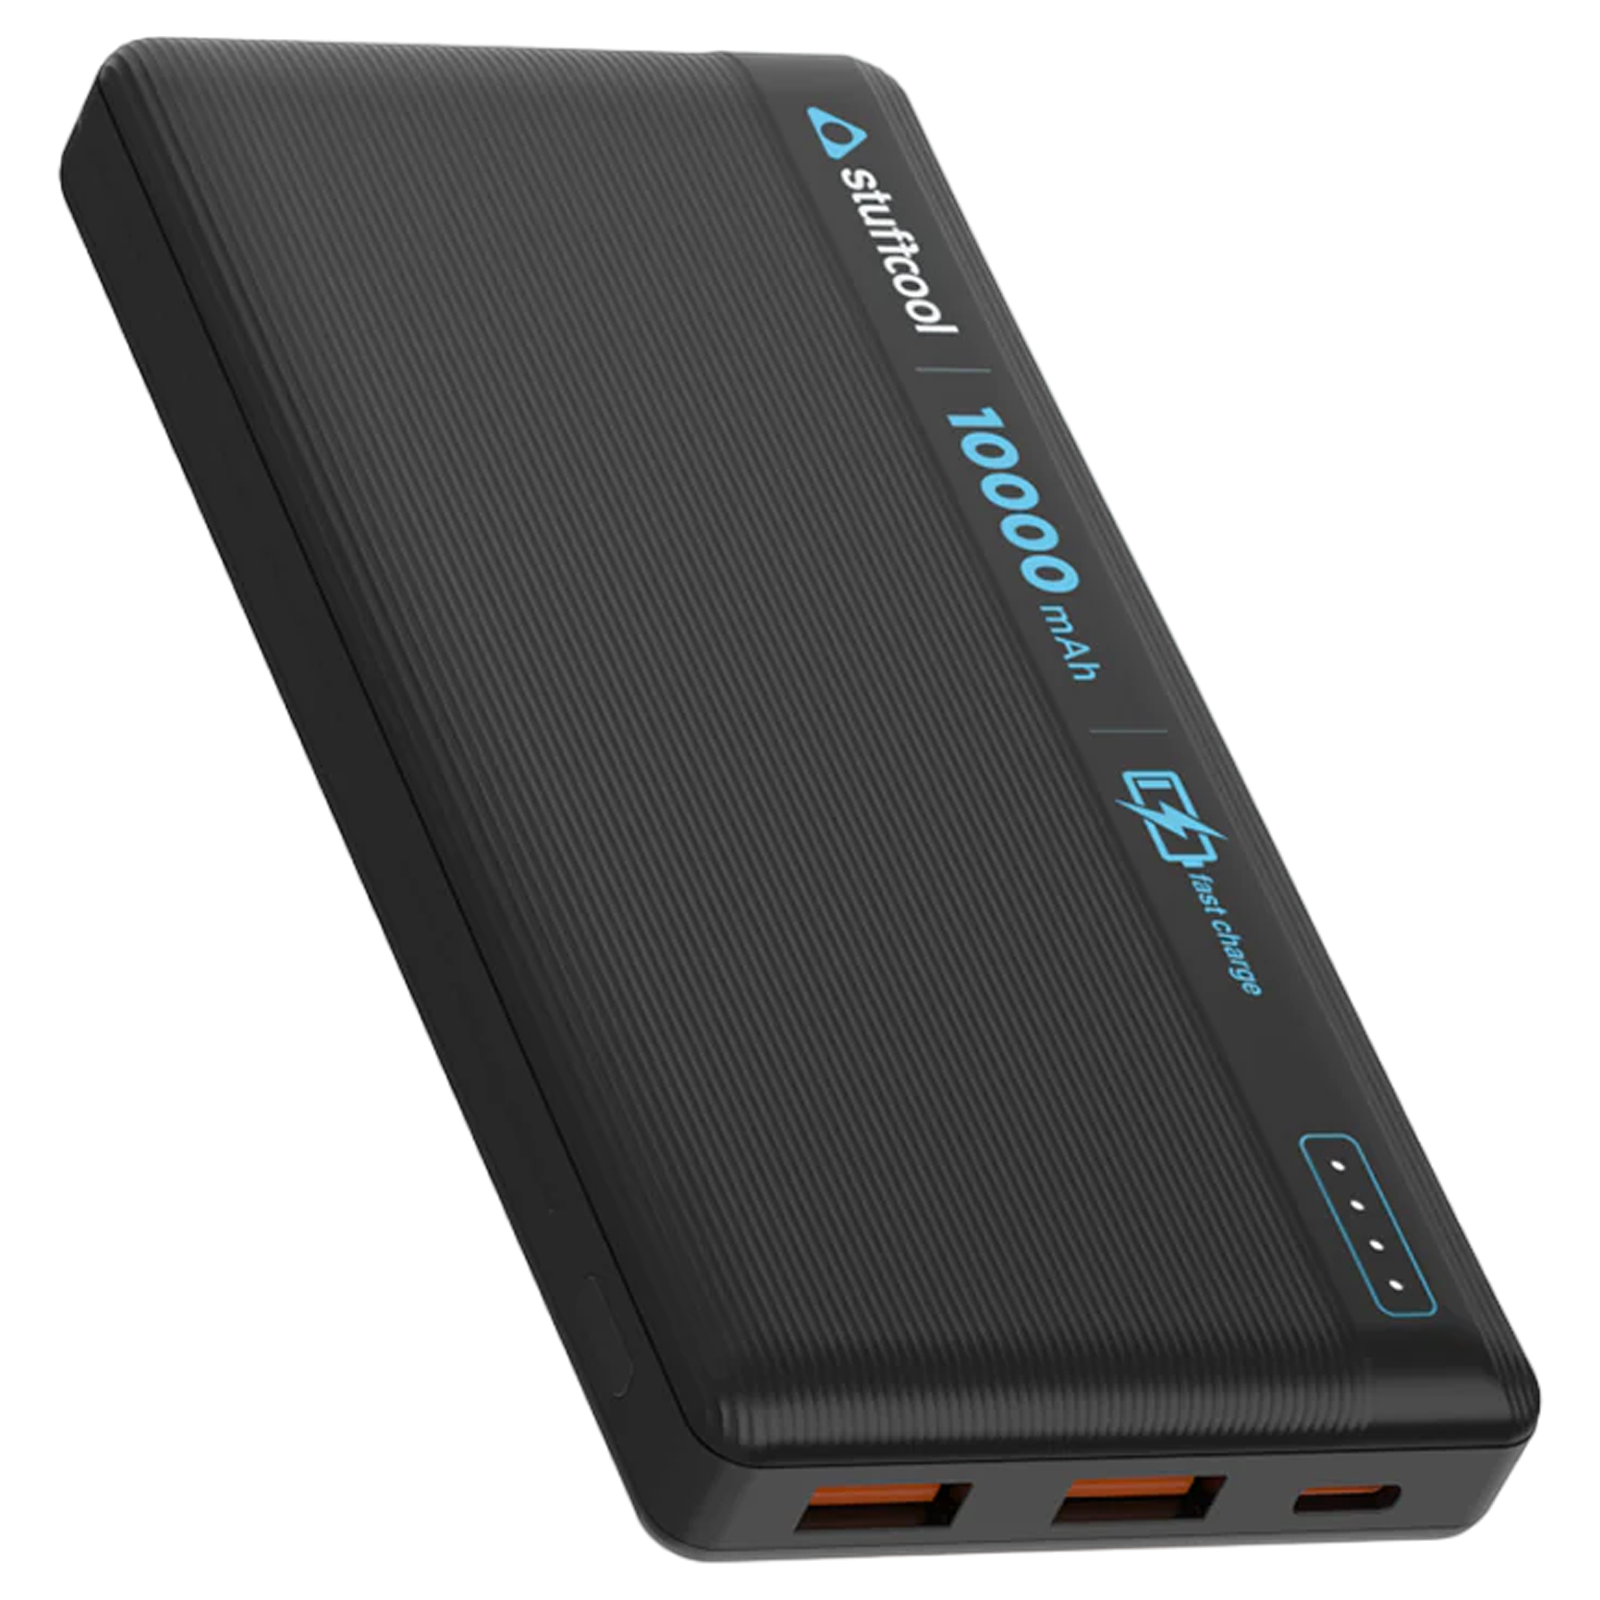 stuffcool Major 10000 mAh 22.5W Fast Charging Power Bank (2 Type A and 1 Type C and Micro USB Ports, LED Indicator, Black)